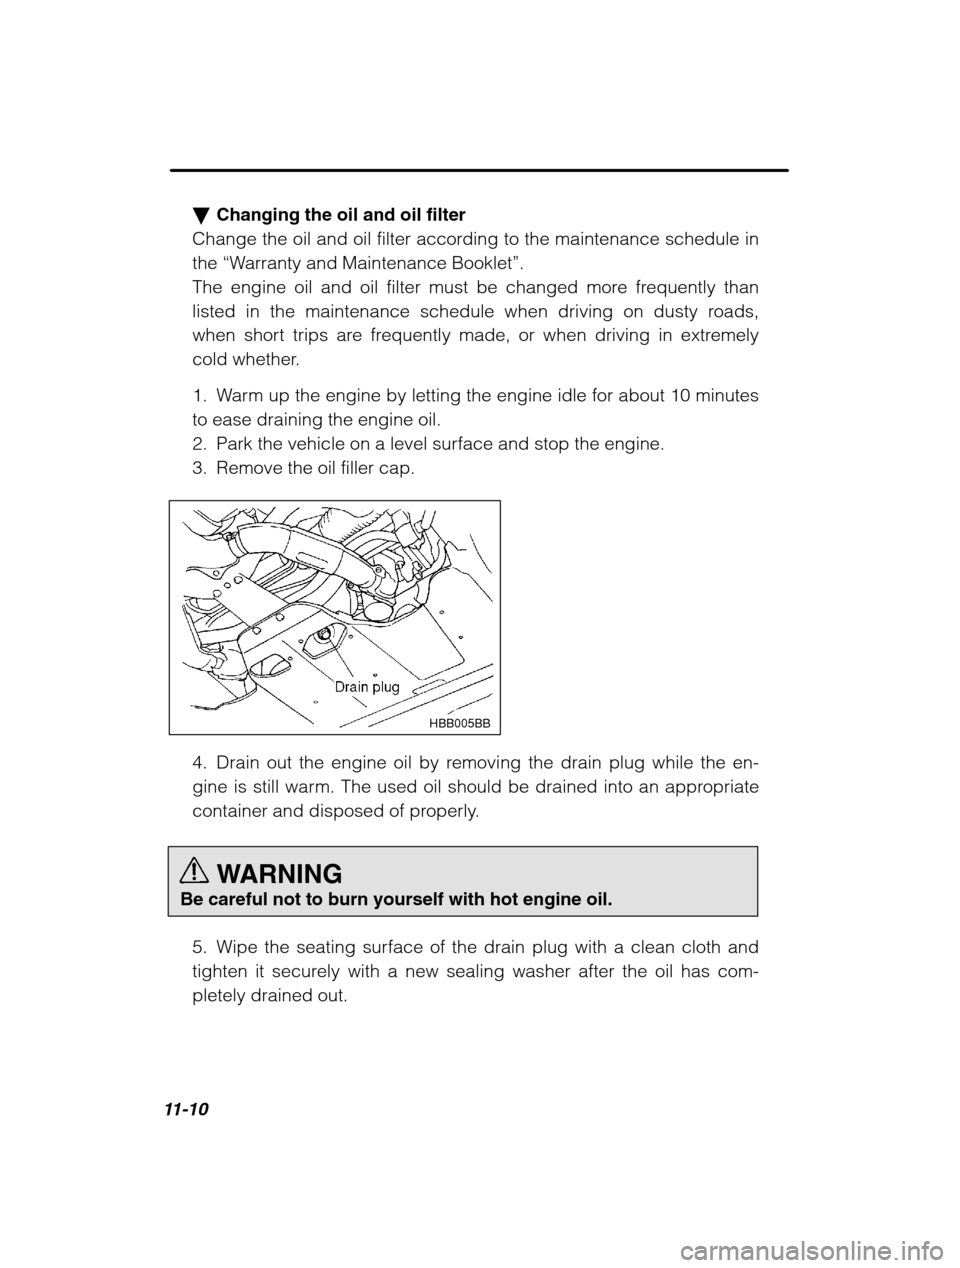 SUBARU OUTBACK 2002 3.G Owners Manual 11-10
�Changing the oil and oil filter
Change the oil and oil filter according to the maintenance schedule in the  “Warranty and Maintenance Booklet ”.
The engine oil and oil filter must be change